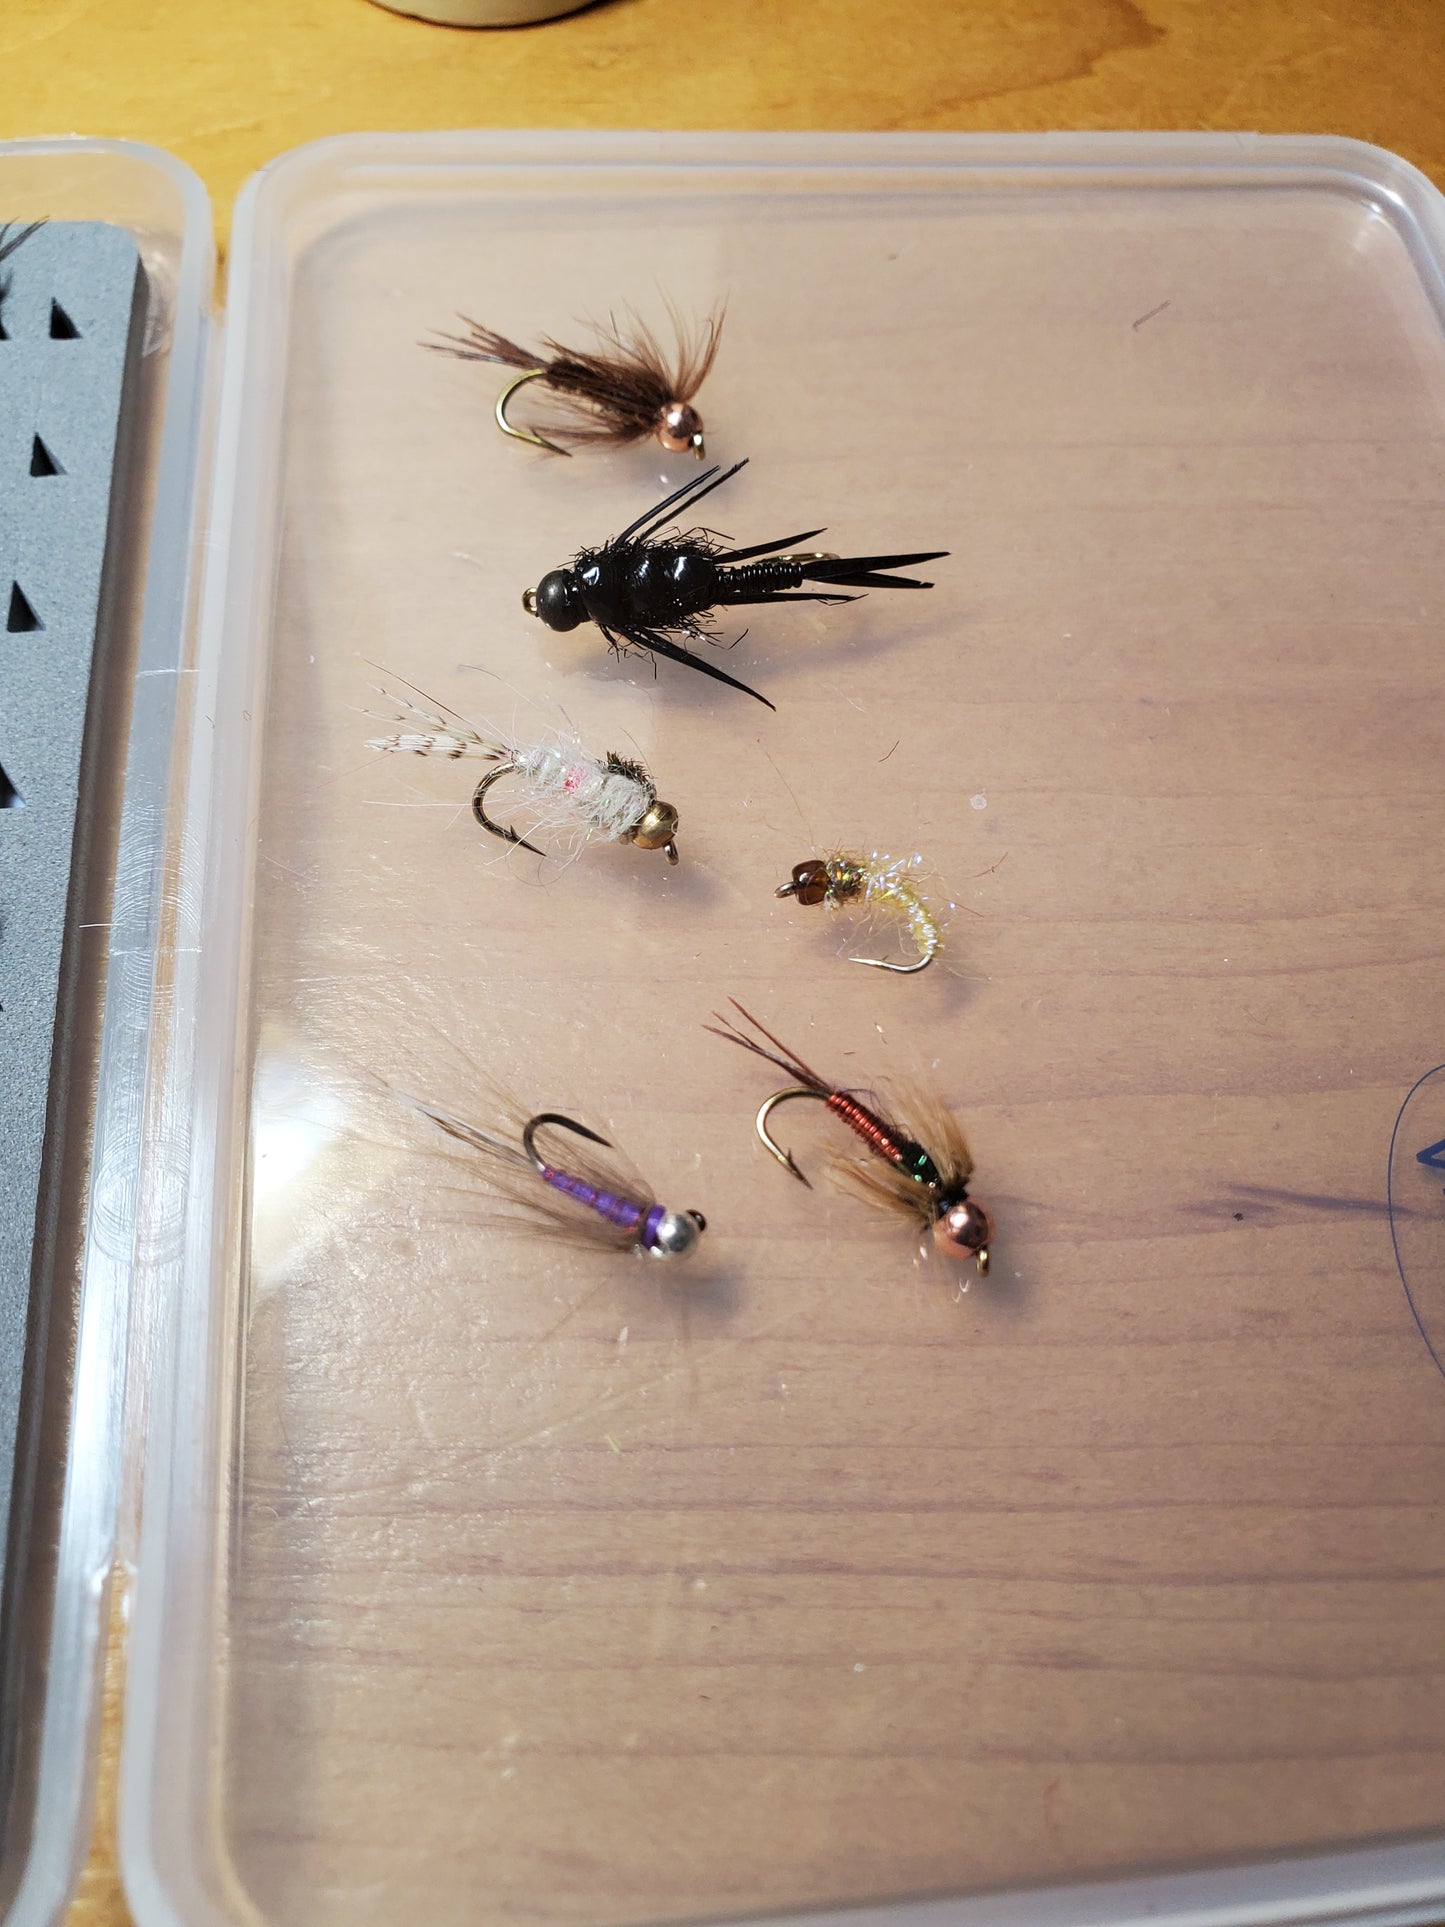 66 Bead Head Nymph Trout Flies in fly Box, Trout Fly Assortment, Nymph Selection